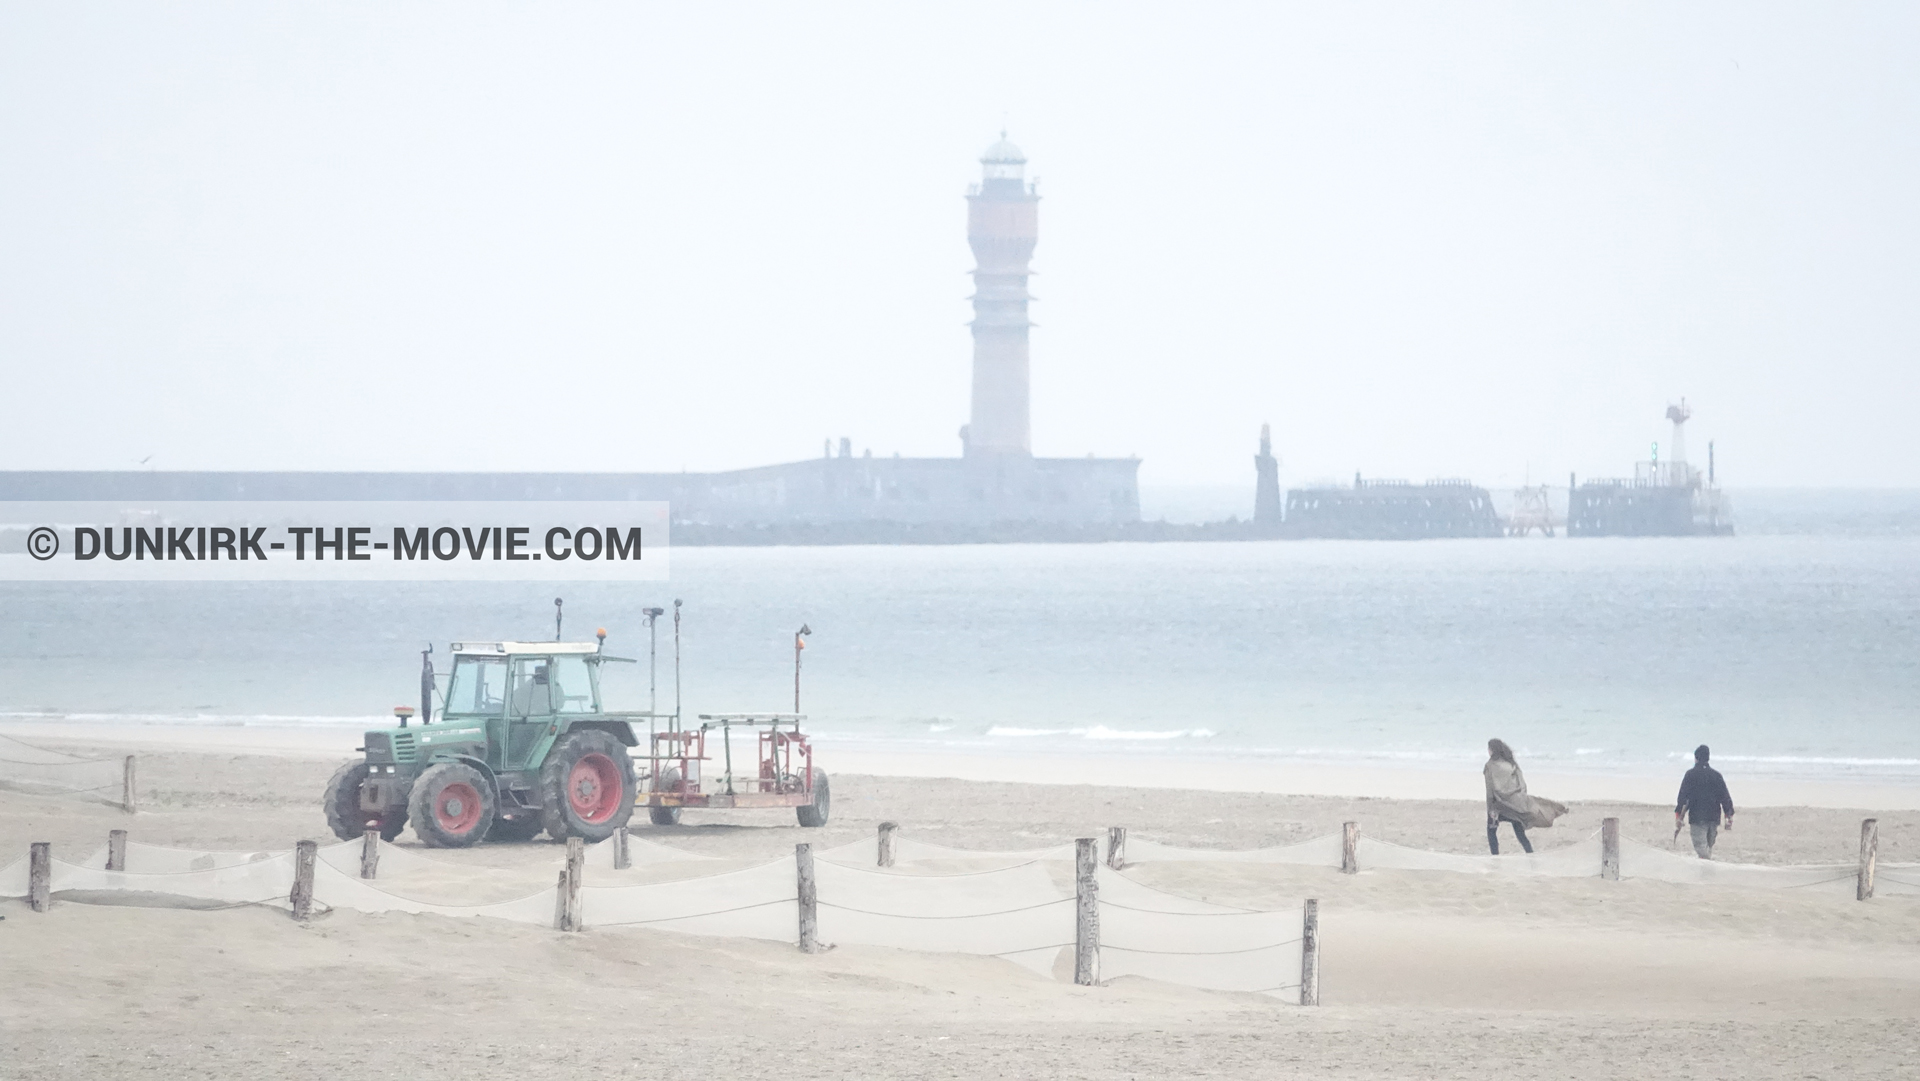 Picture with St Pol sur Mer lighthouse, beach,  from behind the scene of the Dunkirk movie by Nolan